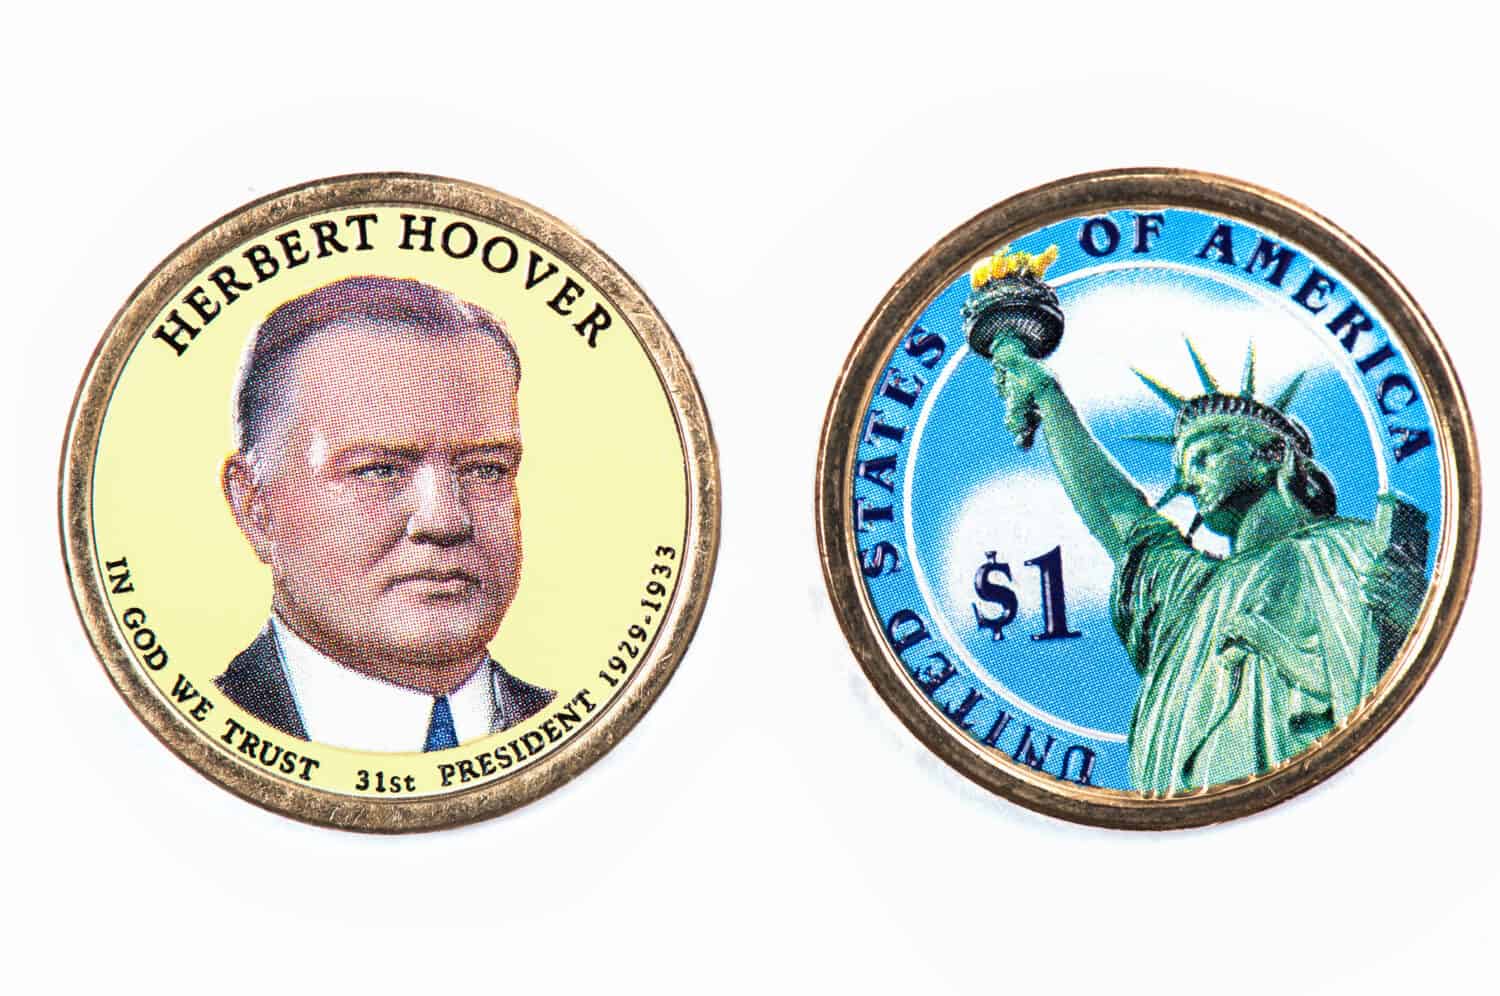 Herbert Hoover Presidential Dollar, USA coin a portrait image of WILLIAM HOWARD  in God We Trust 31th PRESIDENT 1929 -1933 on $1 United Staten of Amekica, Close Up UNC Uncirculated - Collection